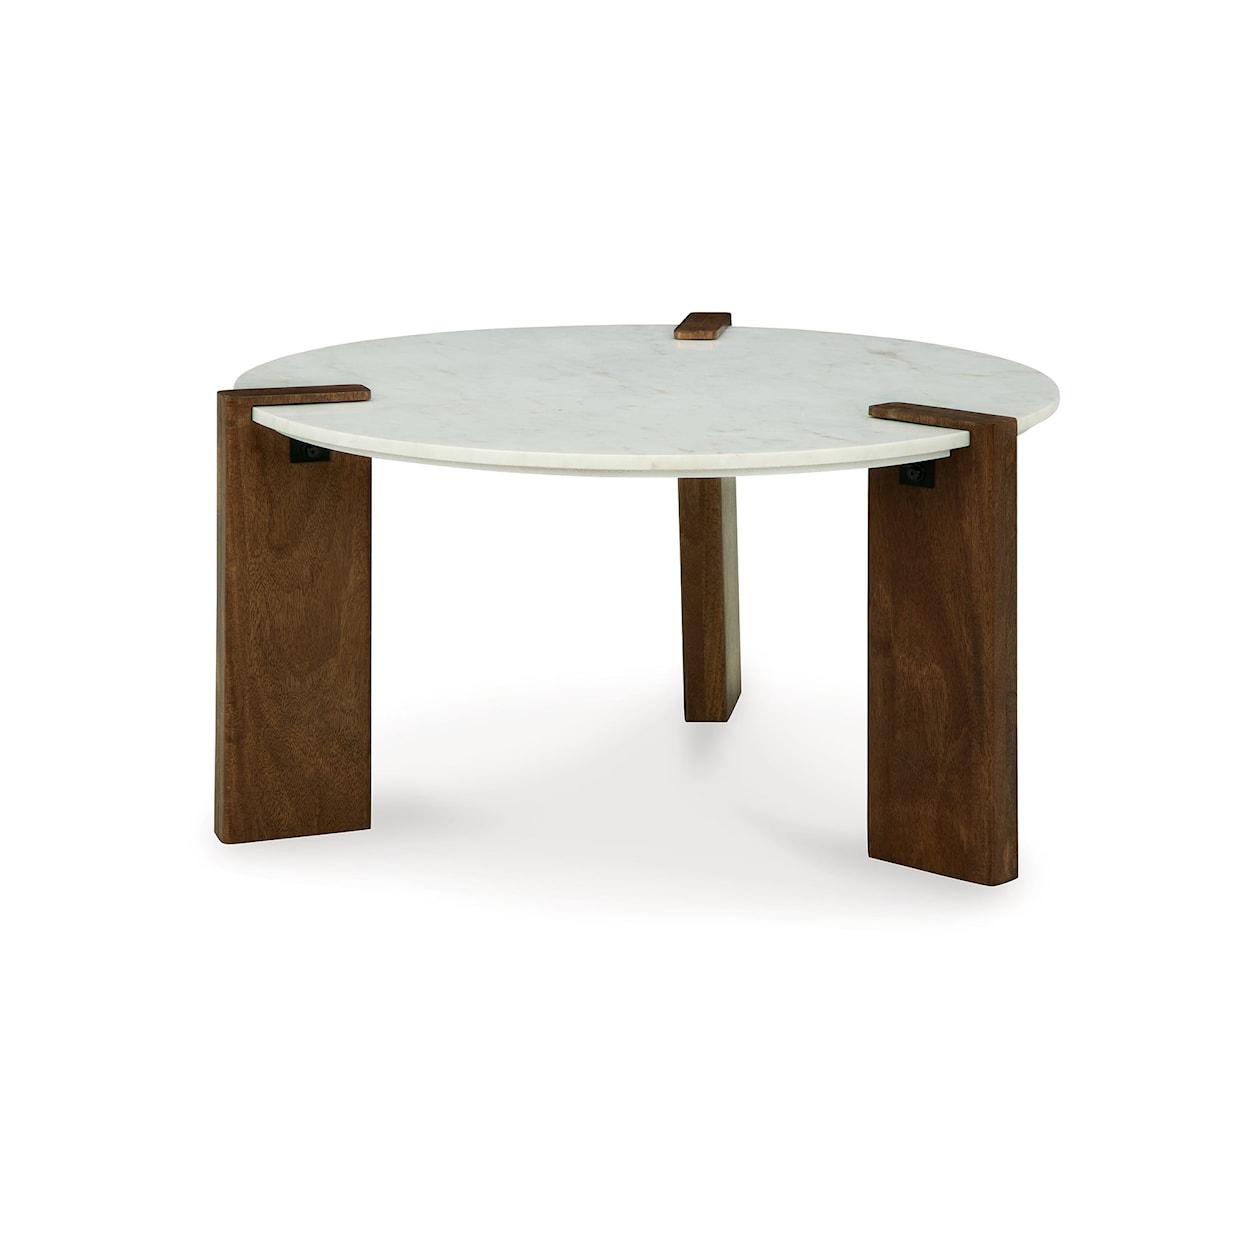 Signature Design by Ashley Isanti Round Coffee Table